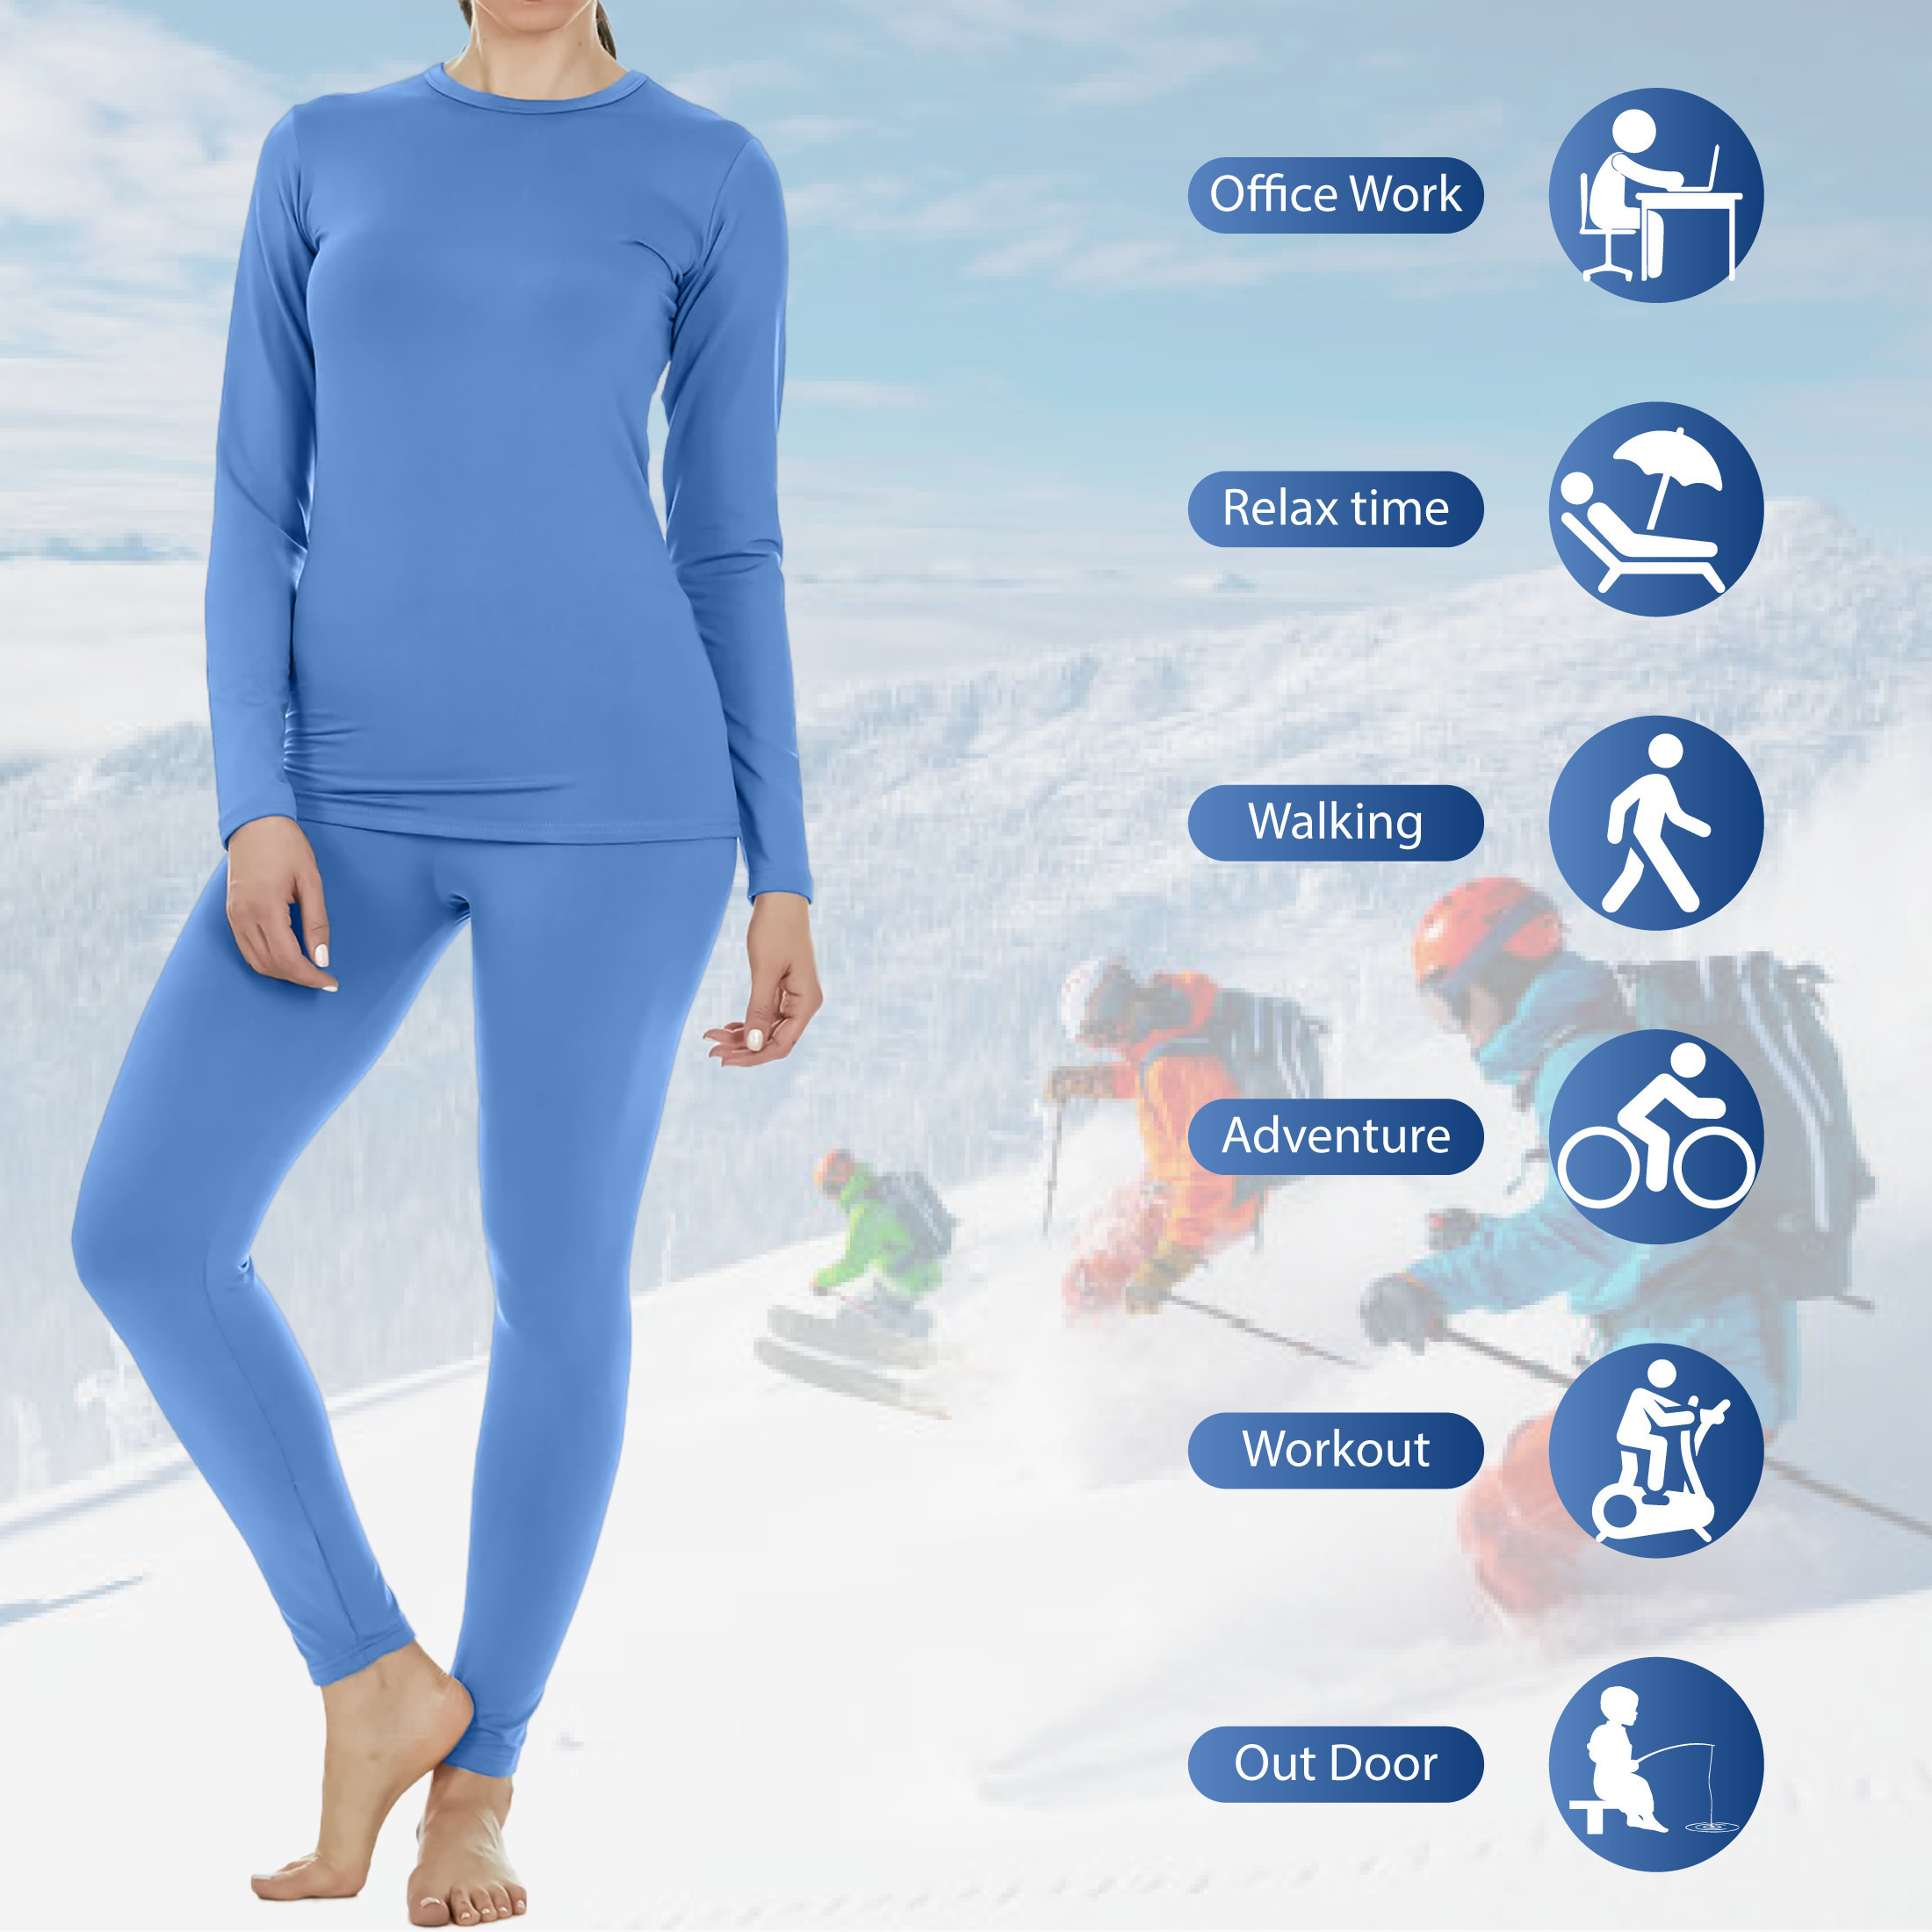 3 Sets: Women's Fleece Lined Thermal Sets For Cold Weather - Medium